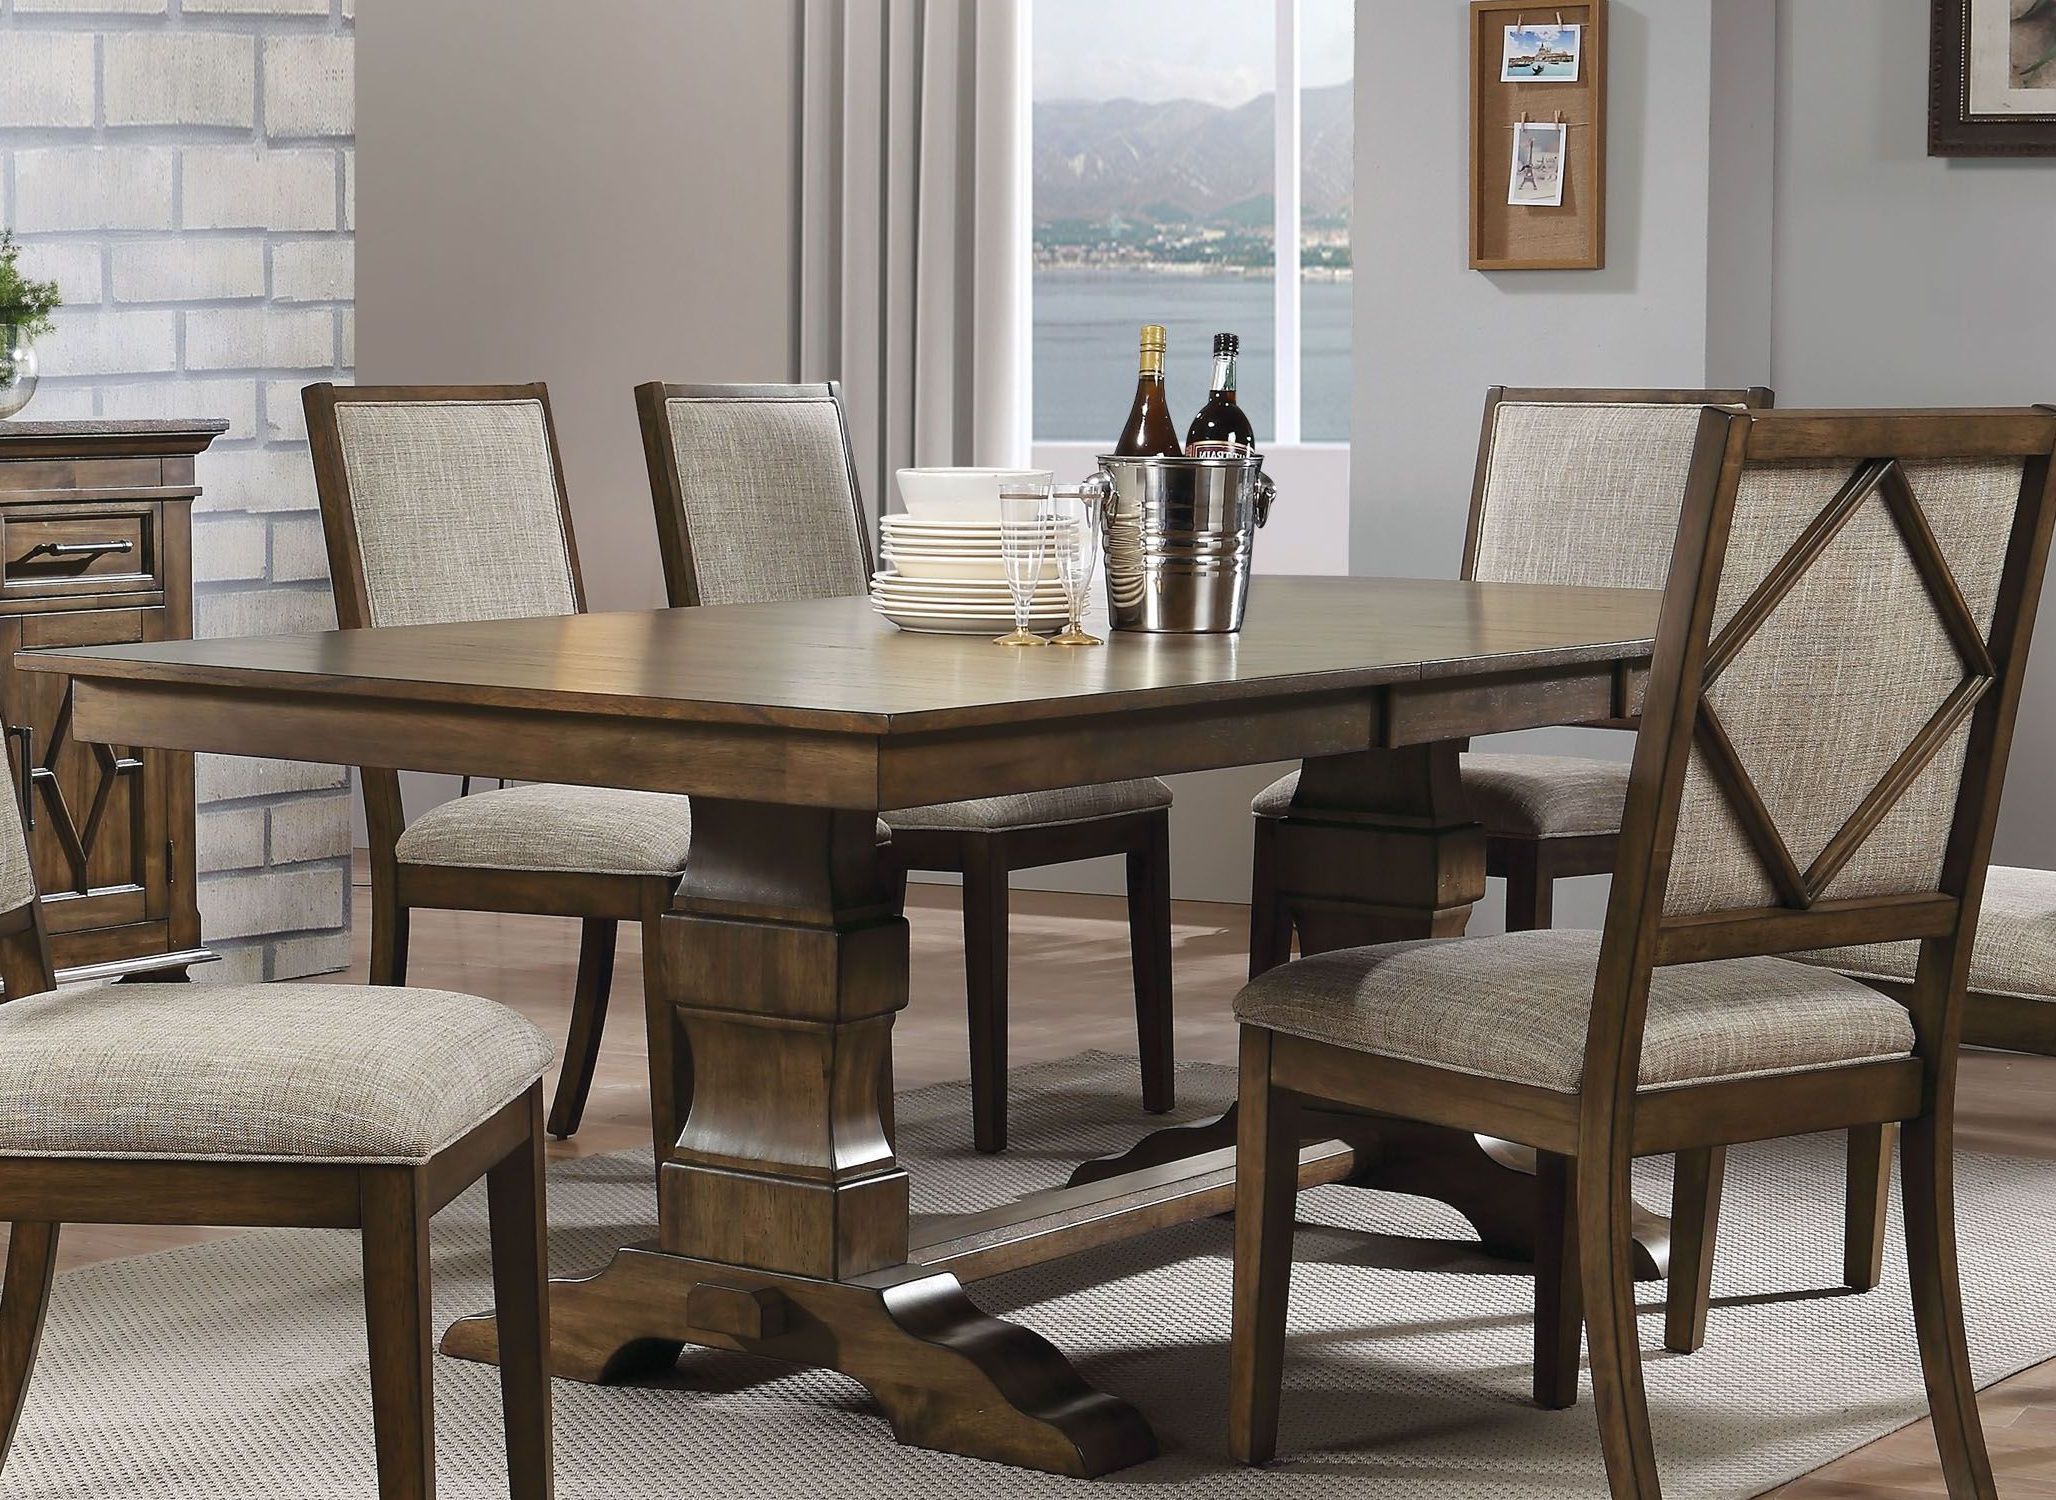 Widely Used Pedestal Dining Tables In Acme Aurodoti Oak Extendable Double Pedestal Dining Table (View 14 of 20)